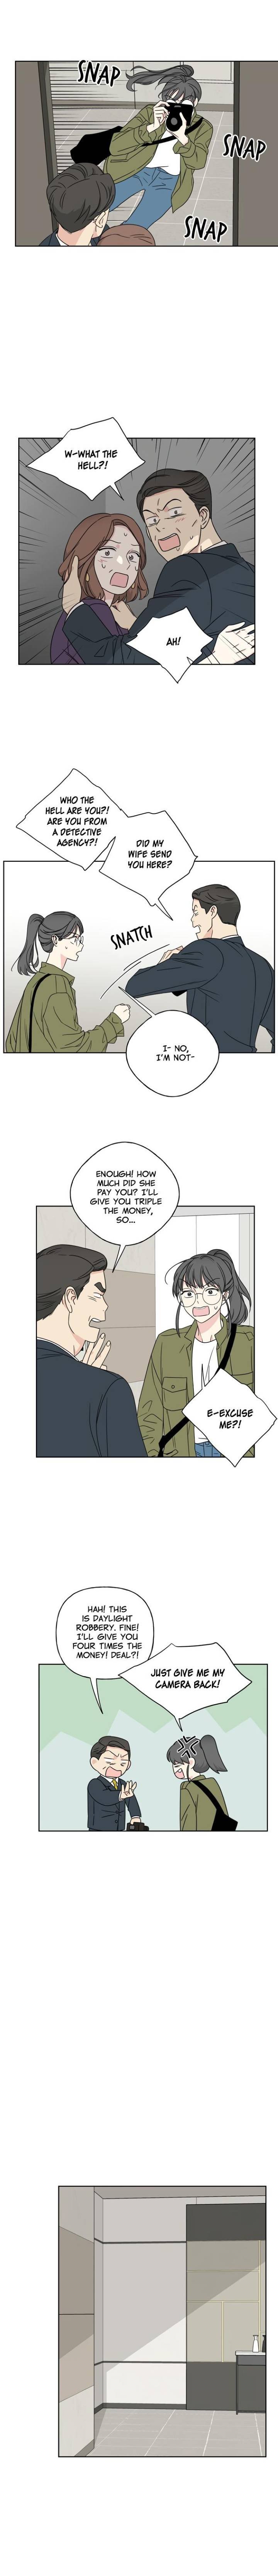 mother-im-sorry-chap-24-11